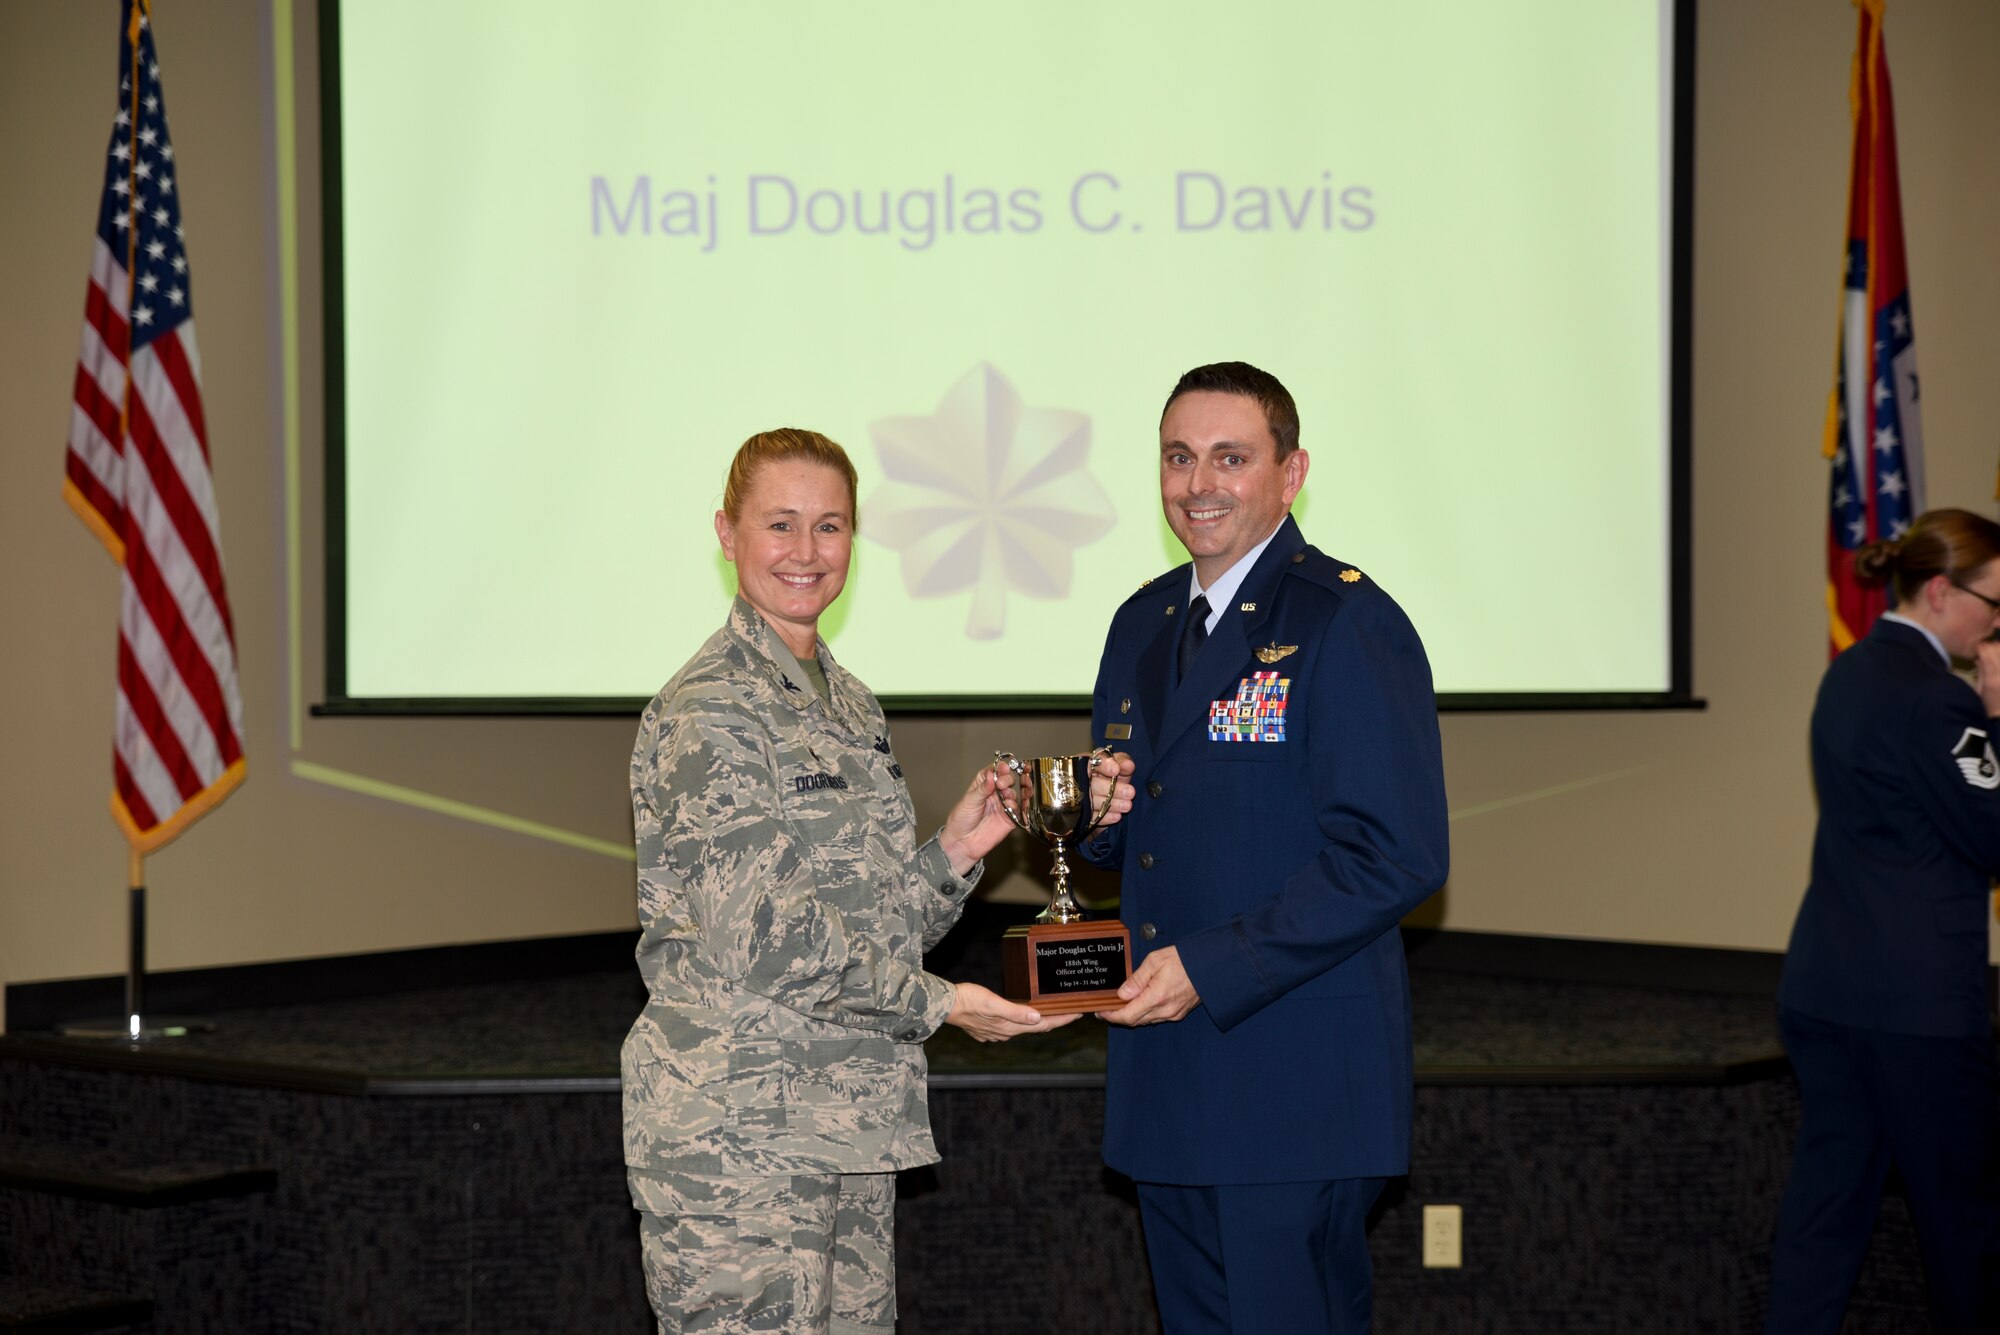 Maj. Doug Davis receives the award for Field Grade Officer of the Year  from Col. Bobbi Doorenbos, 188th Wing commander. Forty two Outstanding Airmen of the Year nominees were recognized Dec. 5, 2015 during a commander's call for their exceptional service to the wing throughout the last year that distinguished themselves among the best in the 188th. Winners were selected in the Airman, Noncommissioned Officer, Senior NCO, Company Grade Officer and Field Grade Officer categories. (U.S. Air National Guard photo by Capt. Holli Nelson/released)  